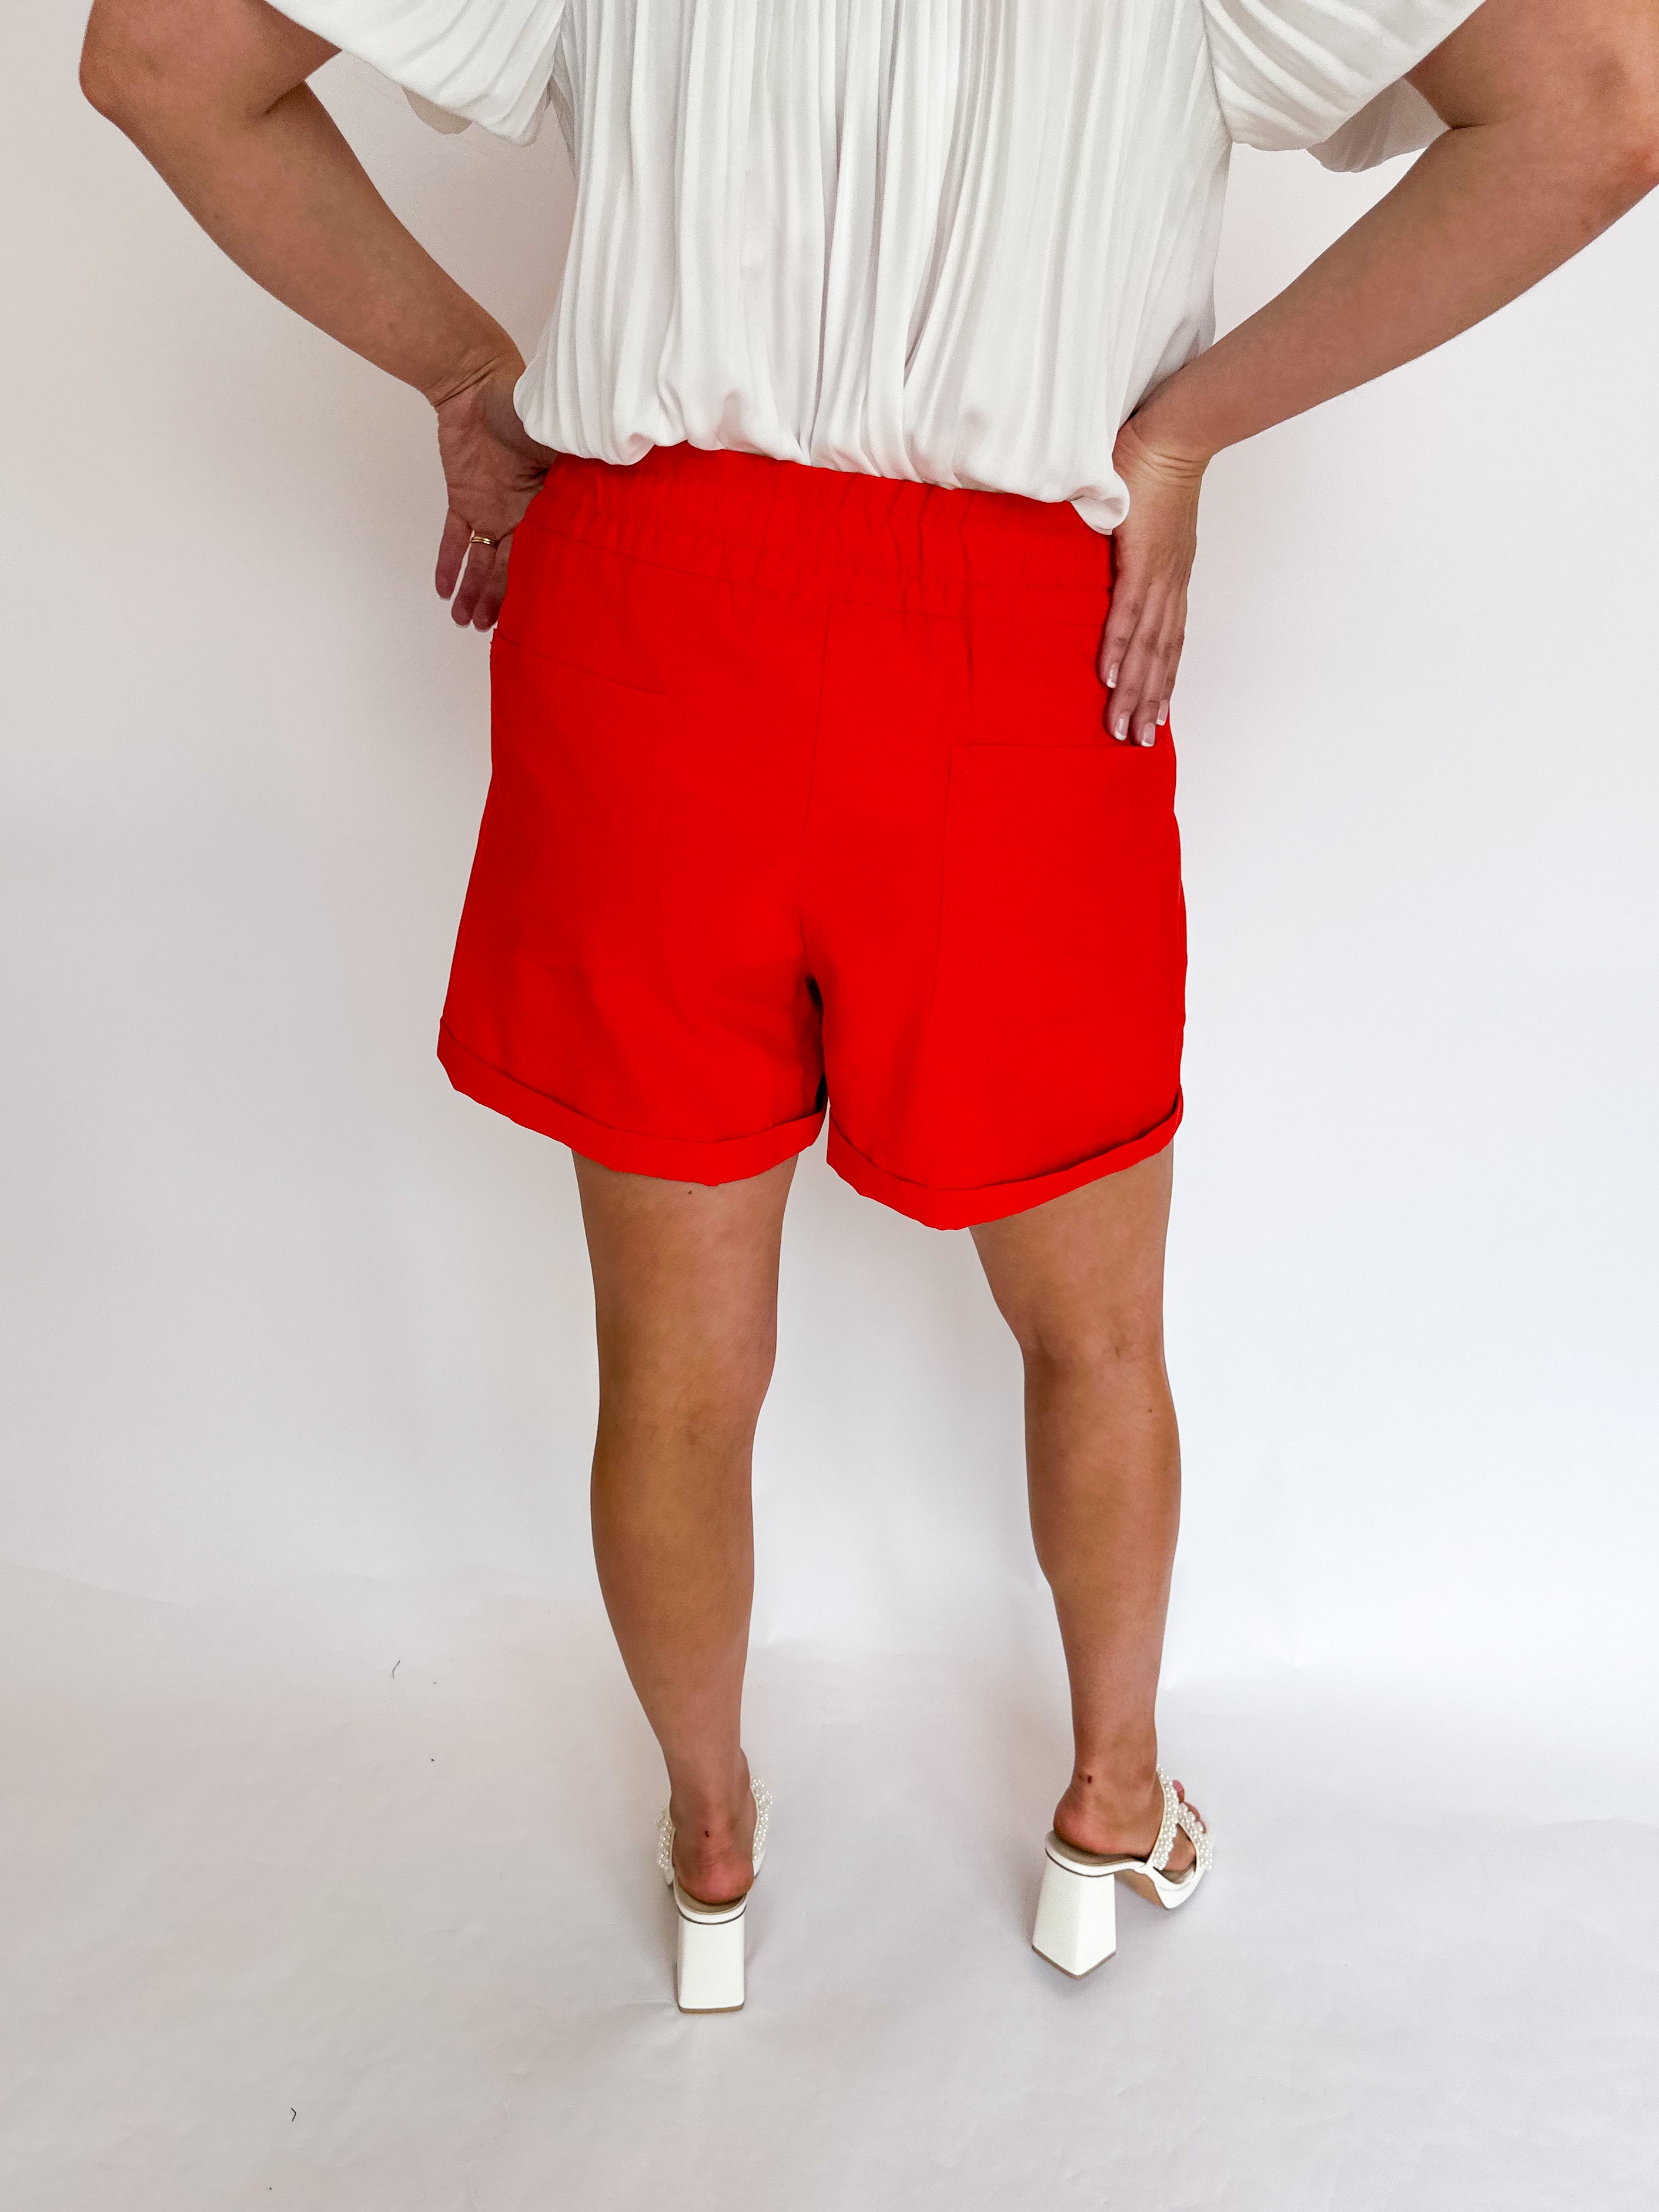 High Waisted Easy Shorts - Red - Restock-410 Shorts/Skirts-JODIFL-July & June Women's Boutique, Located in San Antonio, Texas